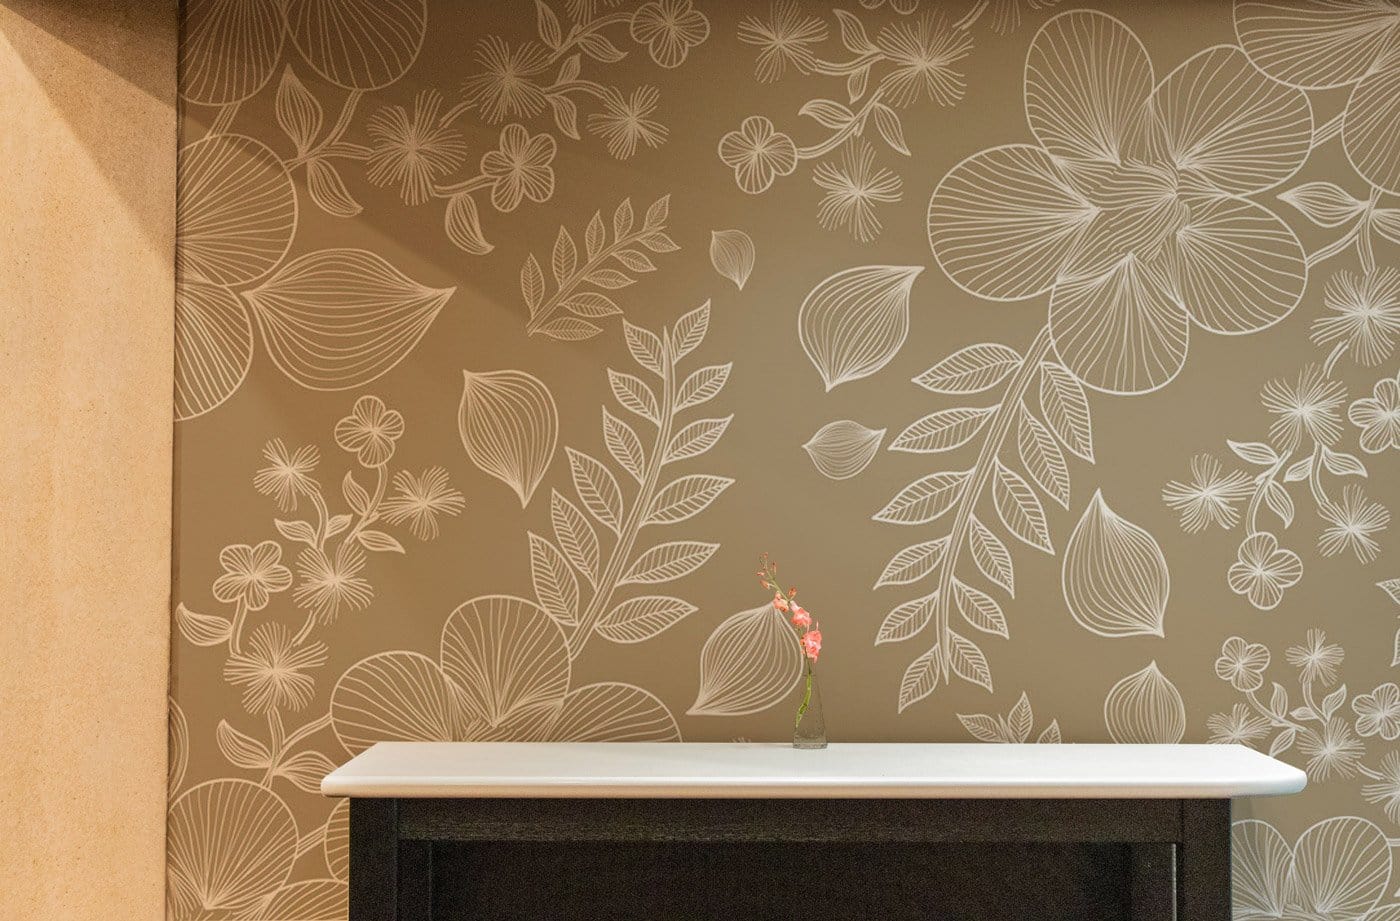 Wallpaper mural in the living room featuring a Line Drawing of Flowers design